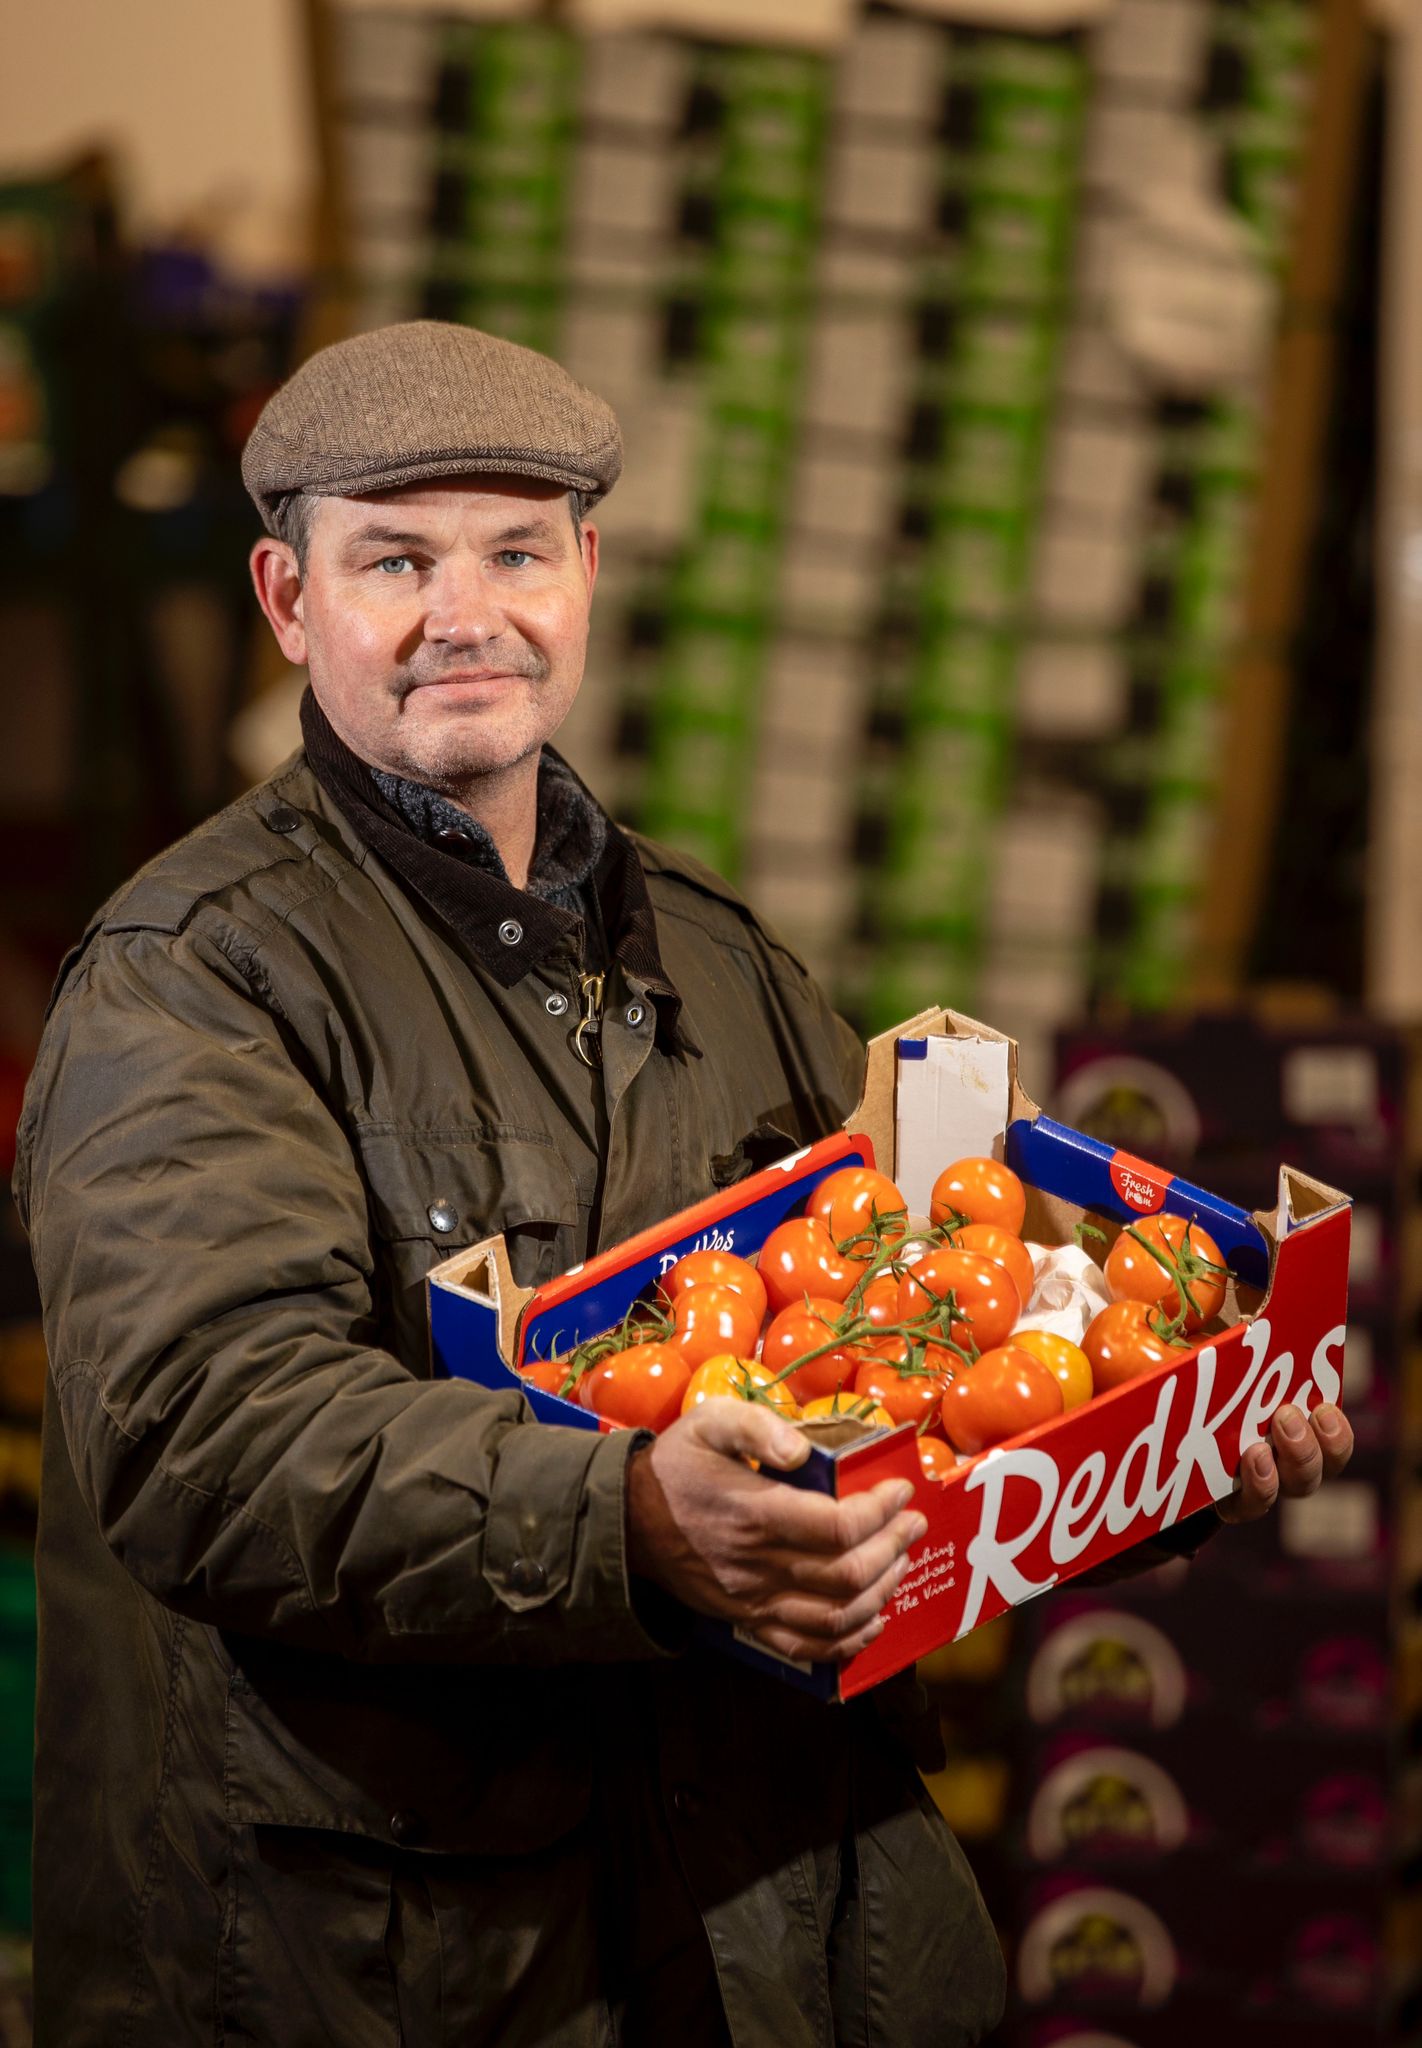 Justin Leonard 35 years service in the fresh produce industry. Dublin's oldest fresh produce suppliers. Located in the Dublin Fruit Market, fresh produce suppliers to retail, office , home and catering.Daily delivery of fresh fruits, vegetables, potatoes 